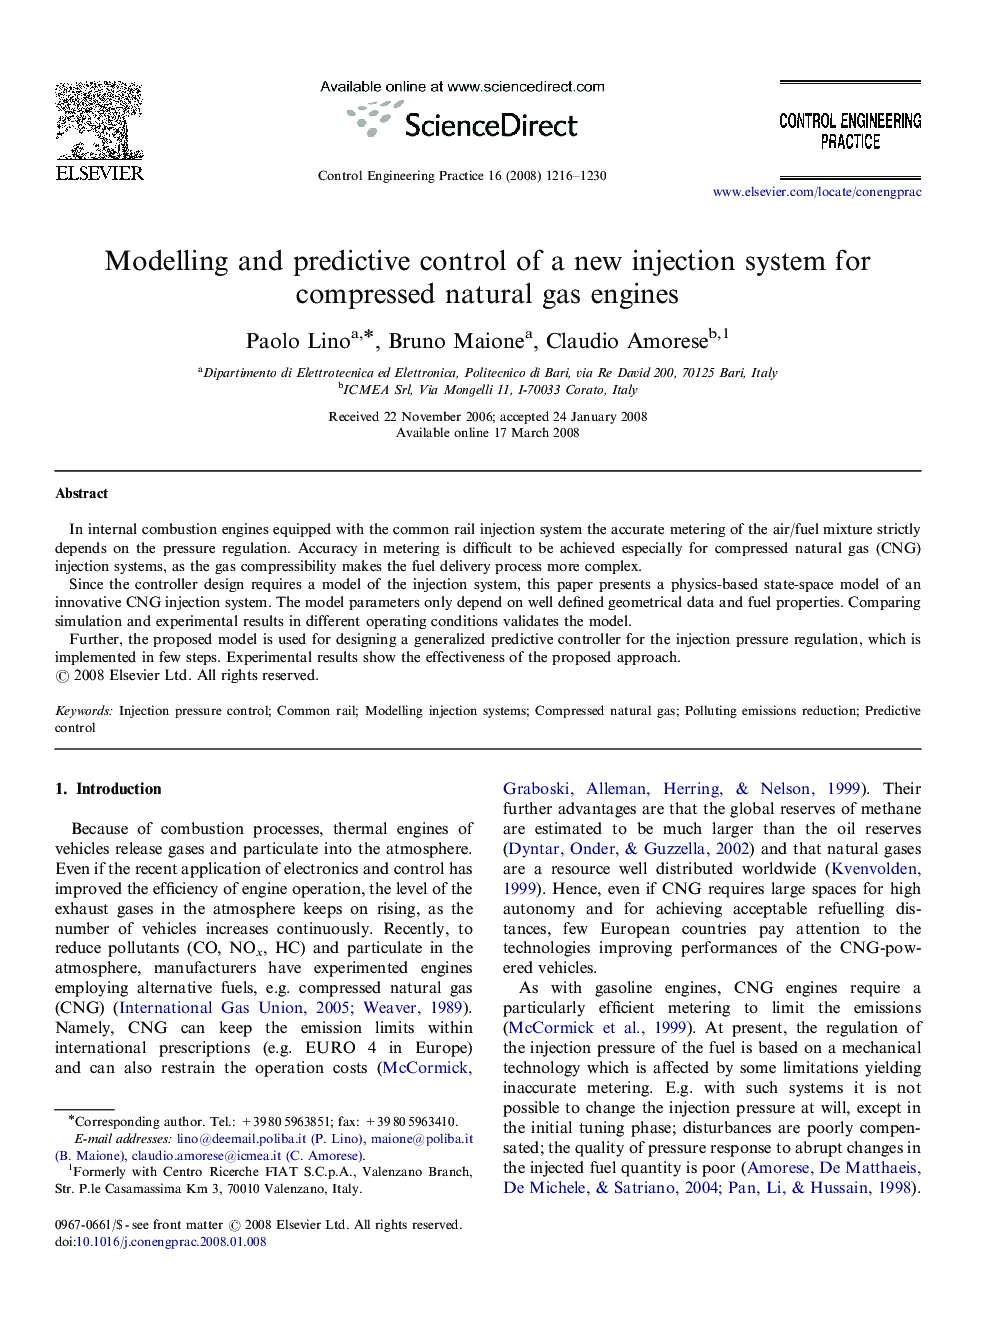 Modelling and predictive control of a new injection system for compressed natural gas engines